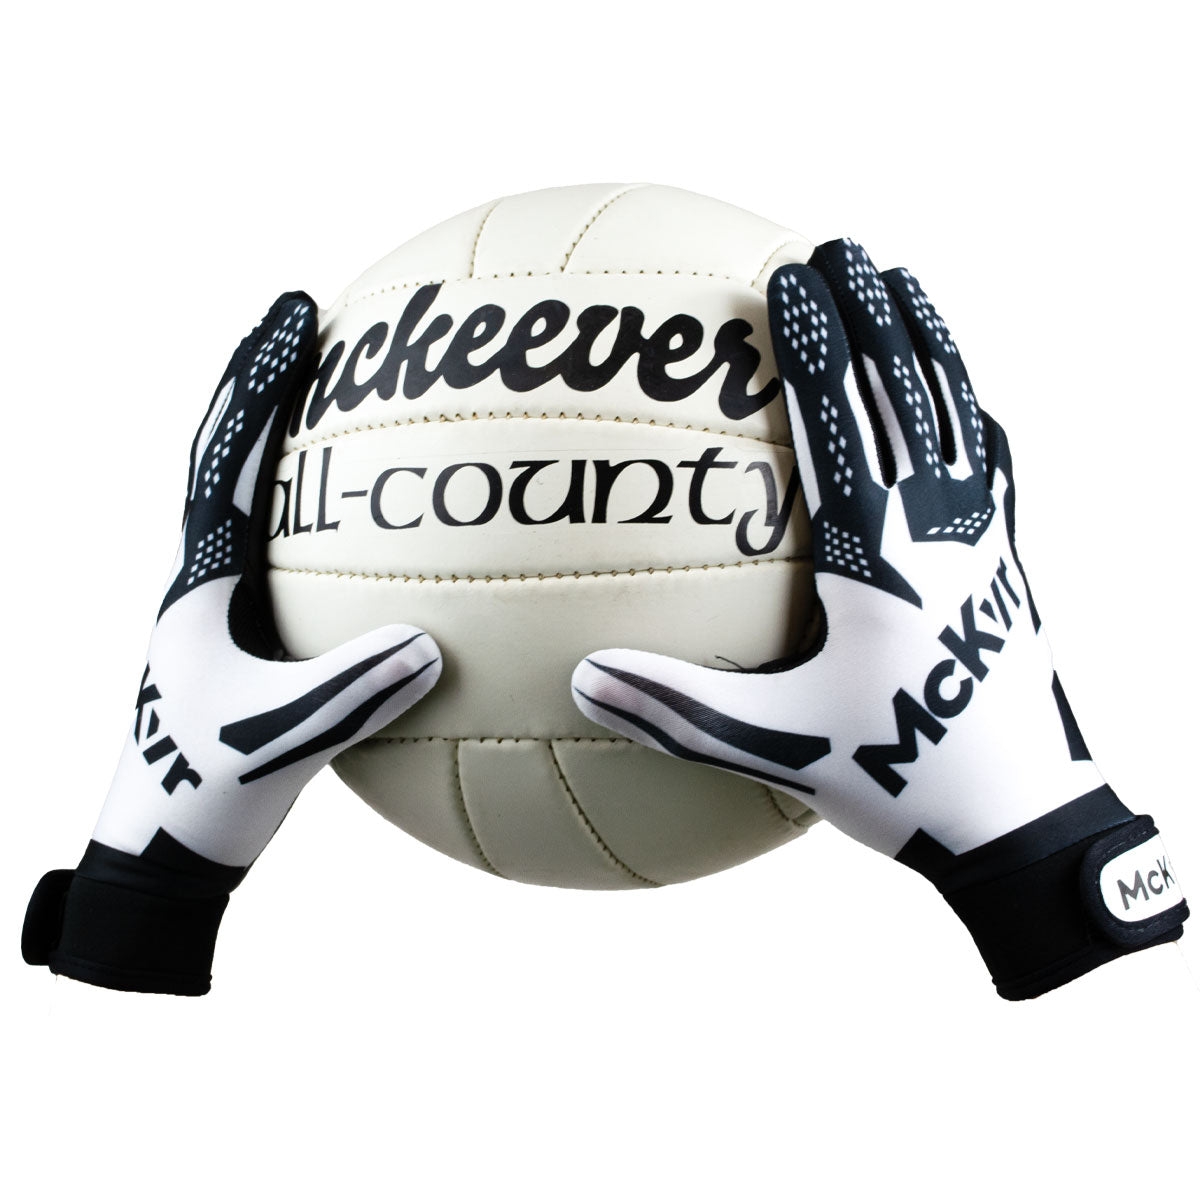 Mc Keever 2.0 Gaelic Gloves - Youth - White/Black